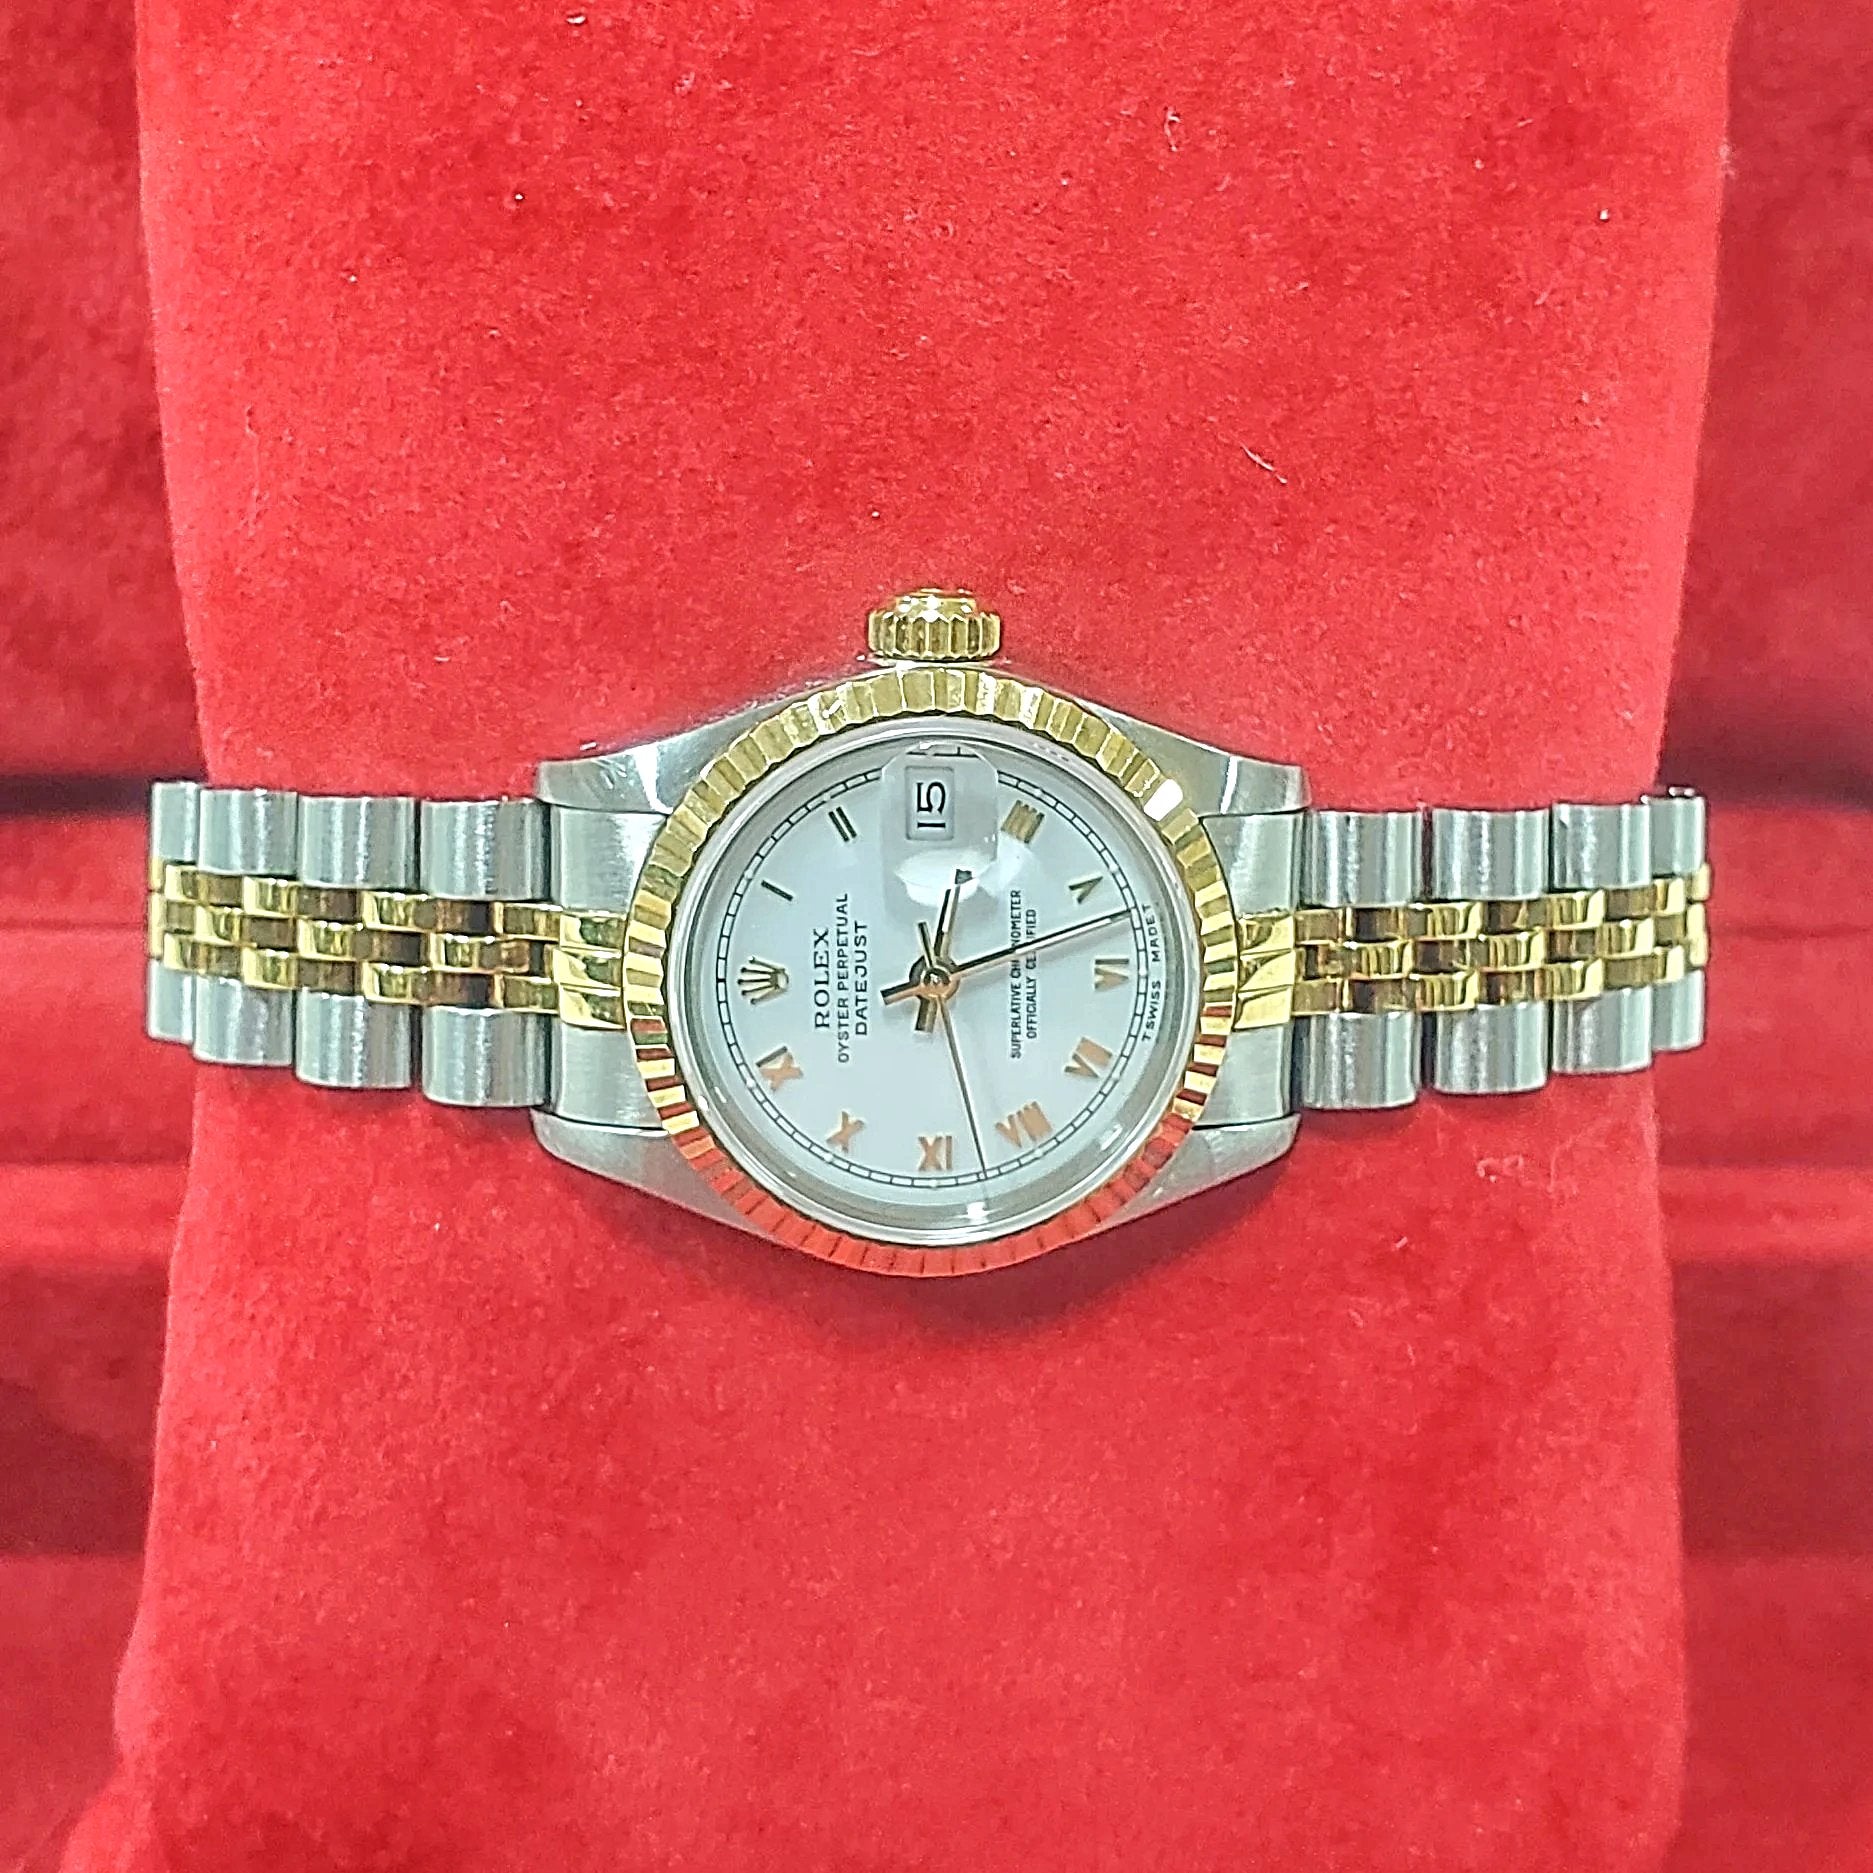 Ladies Rolex 26mm DateJust Two Tone 18K Gold Watch with White Dial, Fluted Bezel and Roman Numerals. (Pre-Owned)